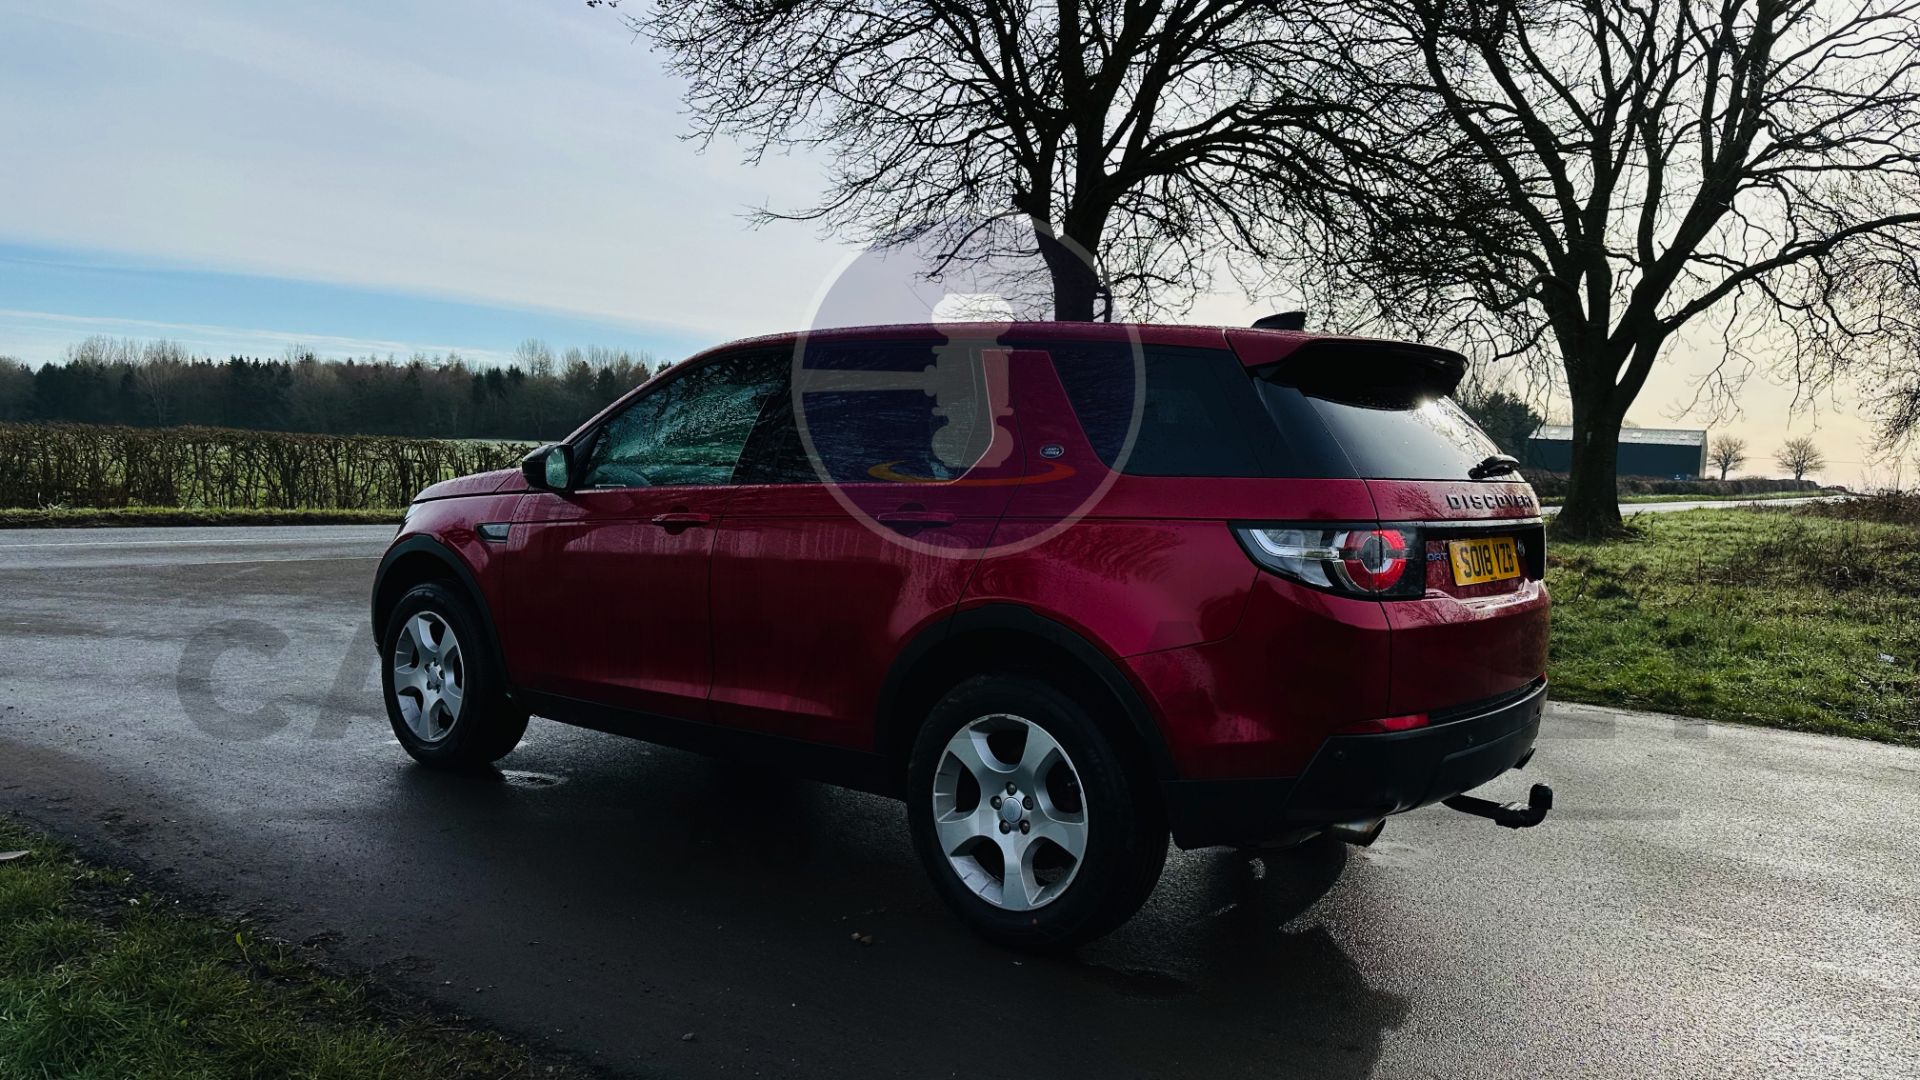 LAND ROVER DISCOVERY SPORT *PURE SPECIAL EDITION* SUV (2018 - EURO 6) 2.0 TD4 - AUTO STOP/START - Image 9 of 48